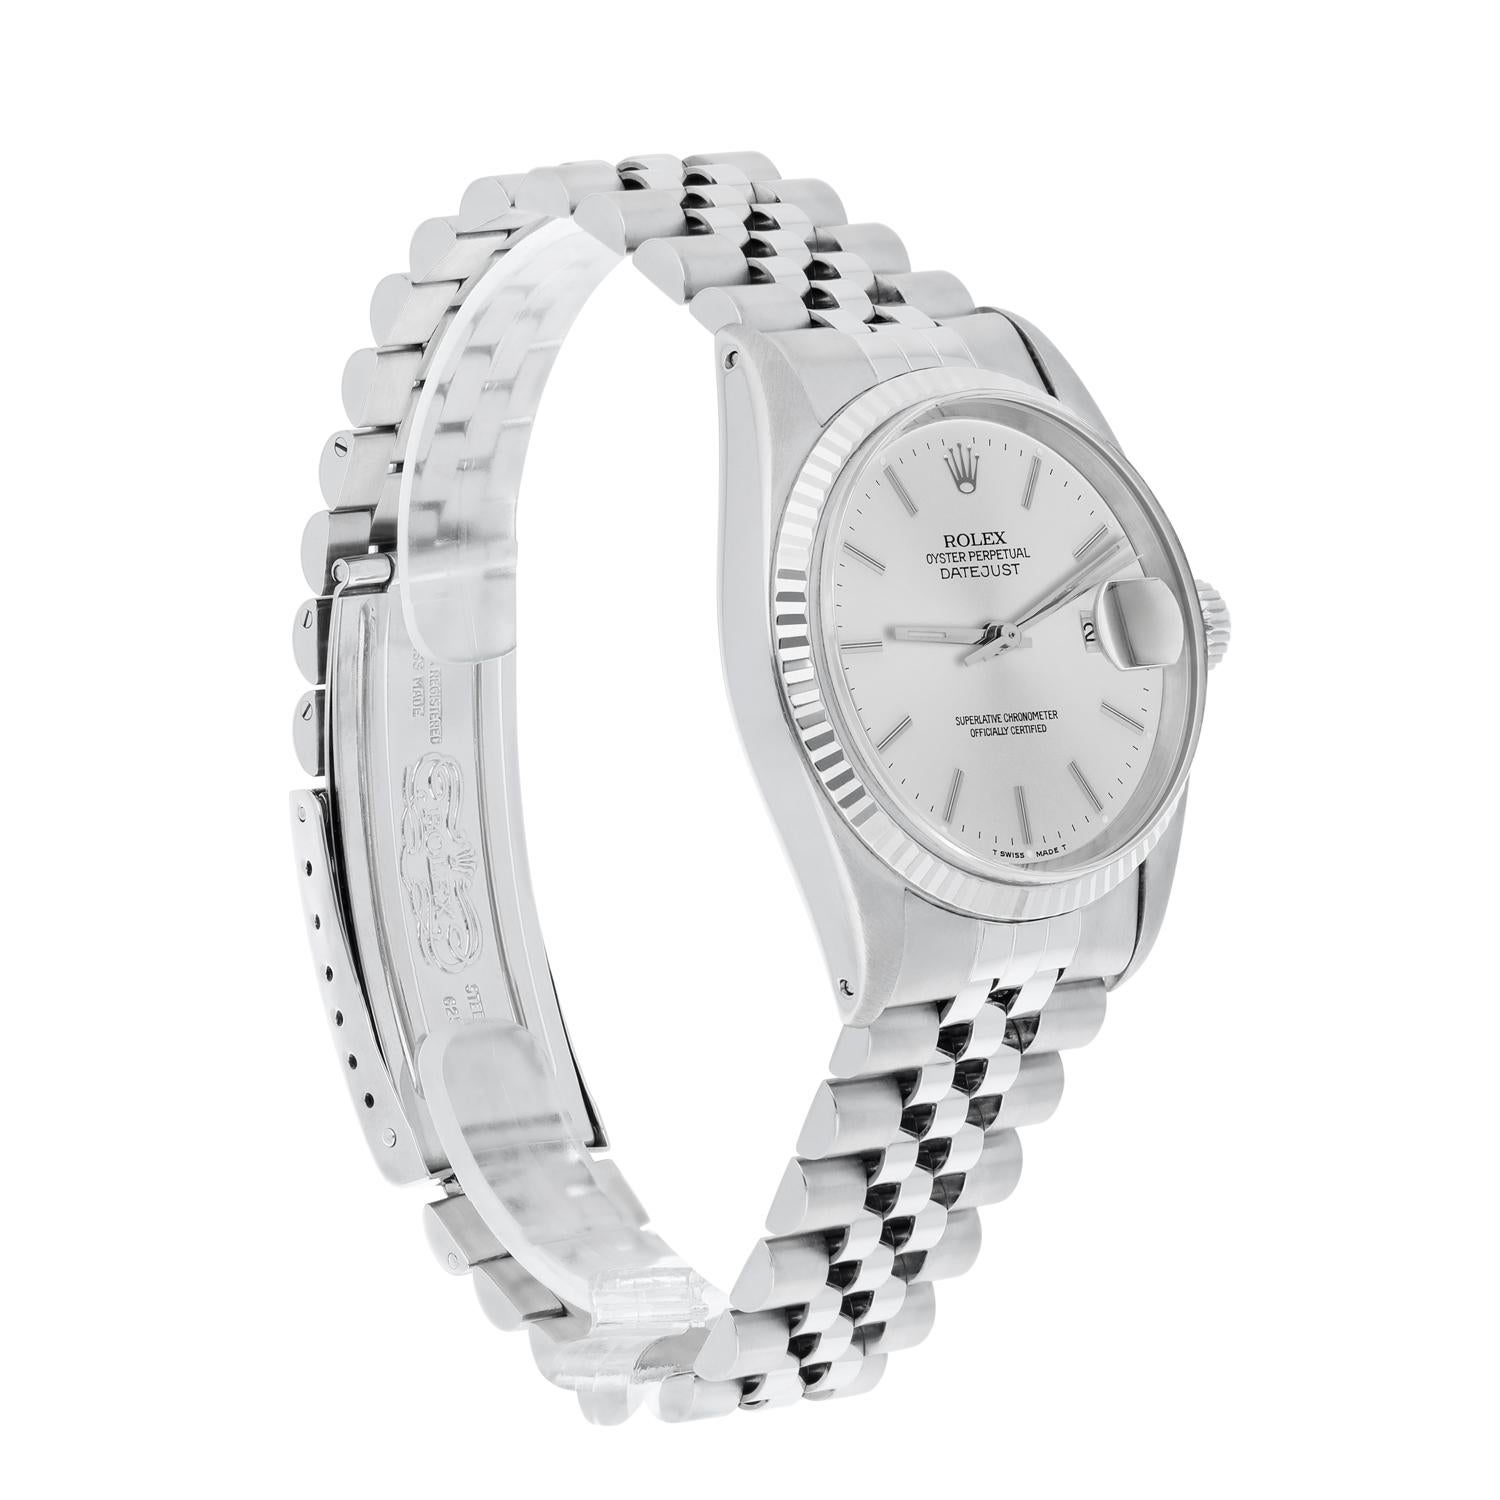 Rolex Datejust 36mm Stainless Steel 16014 Silver Stick Dial, Circa 1987 For Sale 2